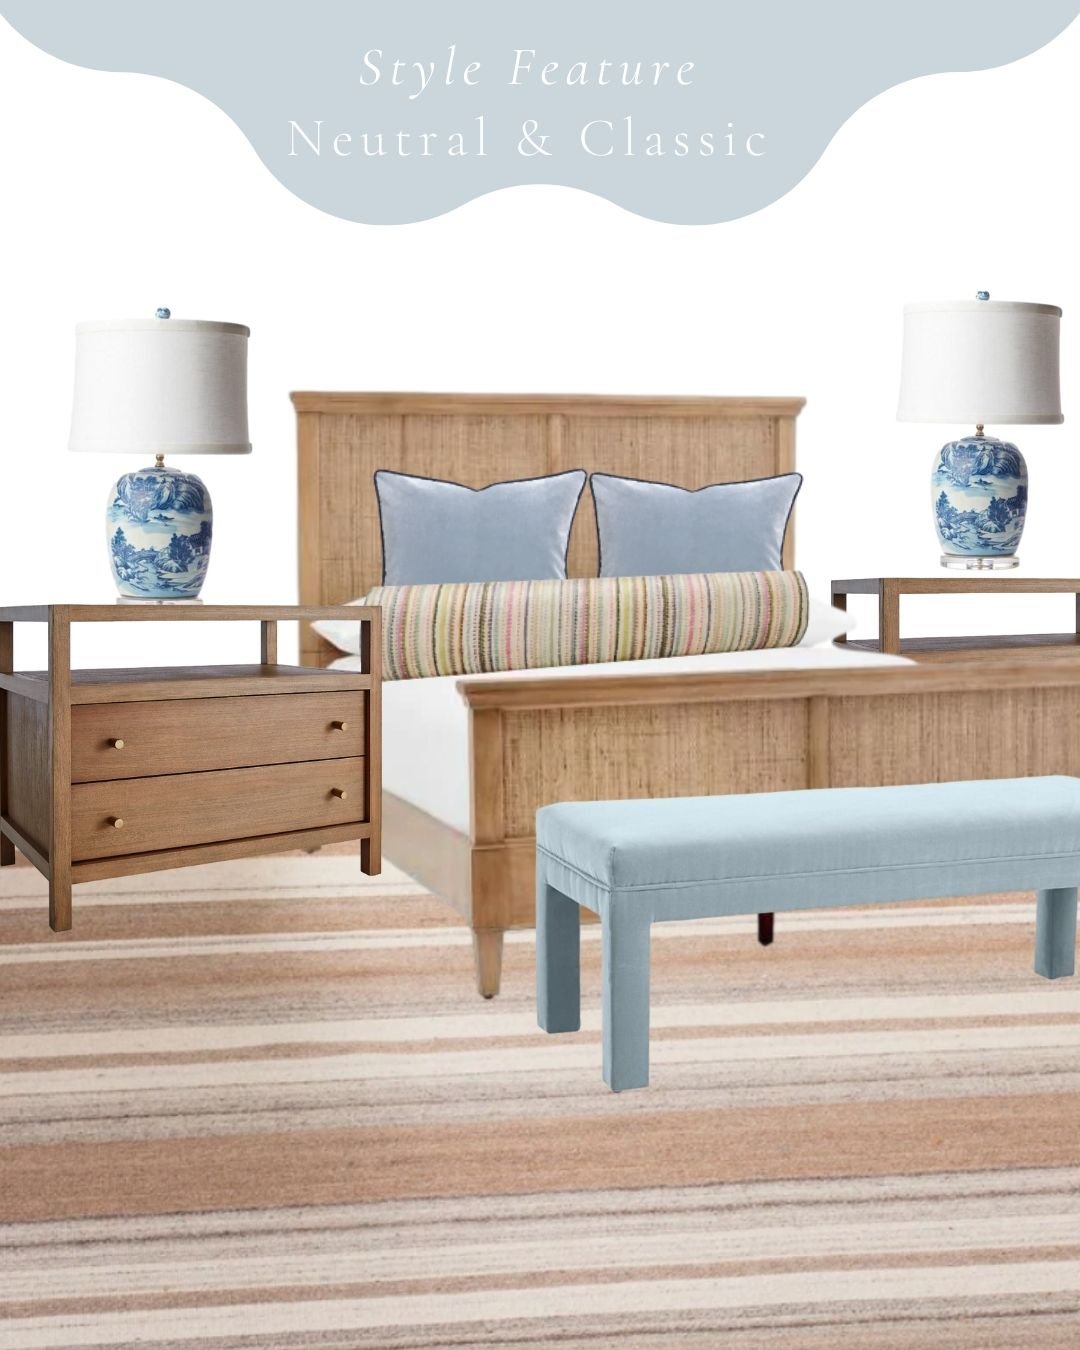 Pottery Barn Dupes - Get The Amazing Look For Less 